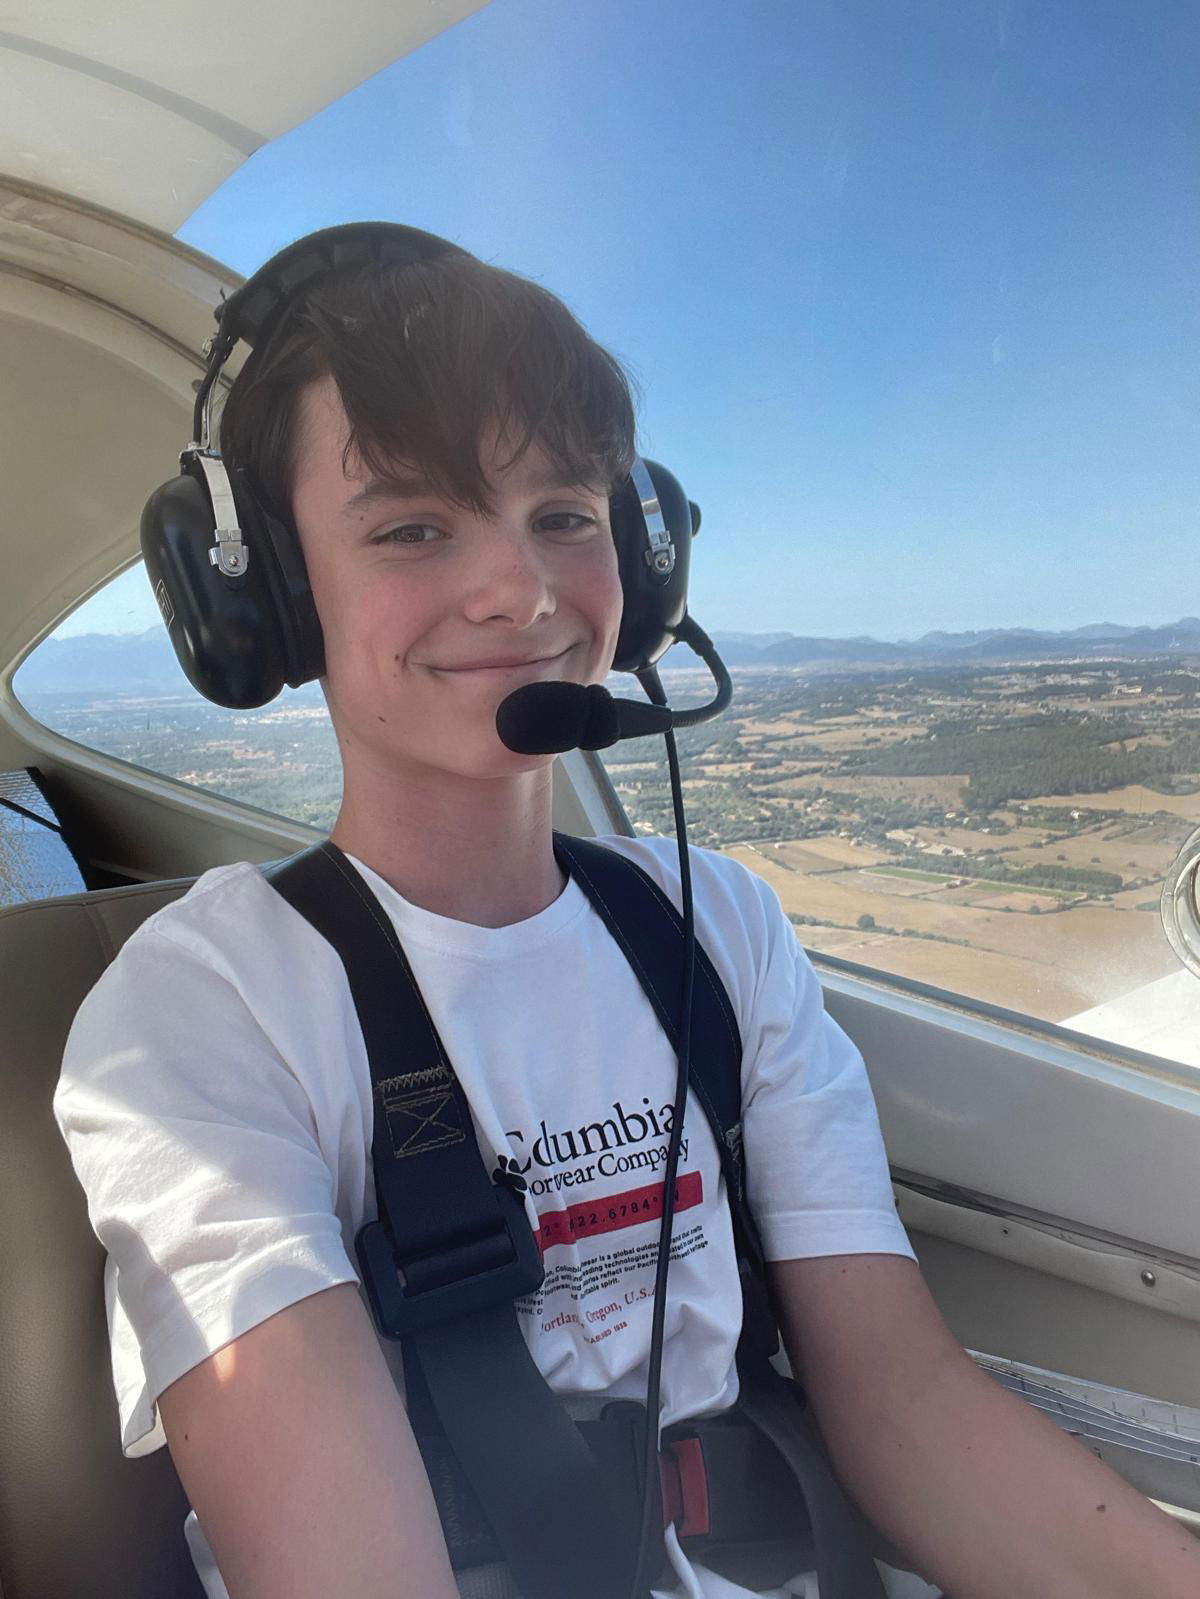 FINN TAYLOR - Our youngest student Pilot aged 14 years old